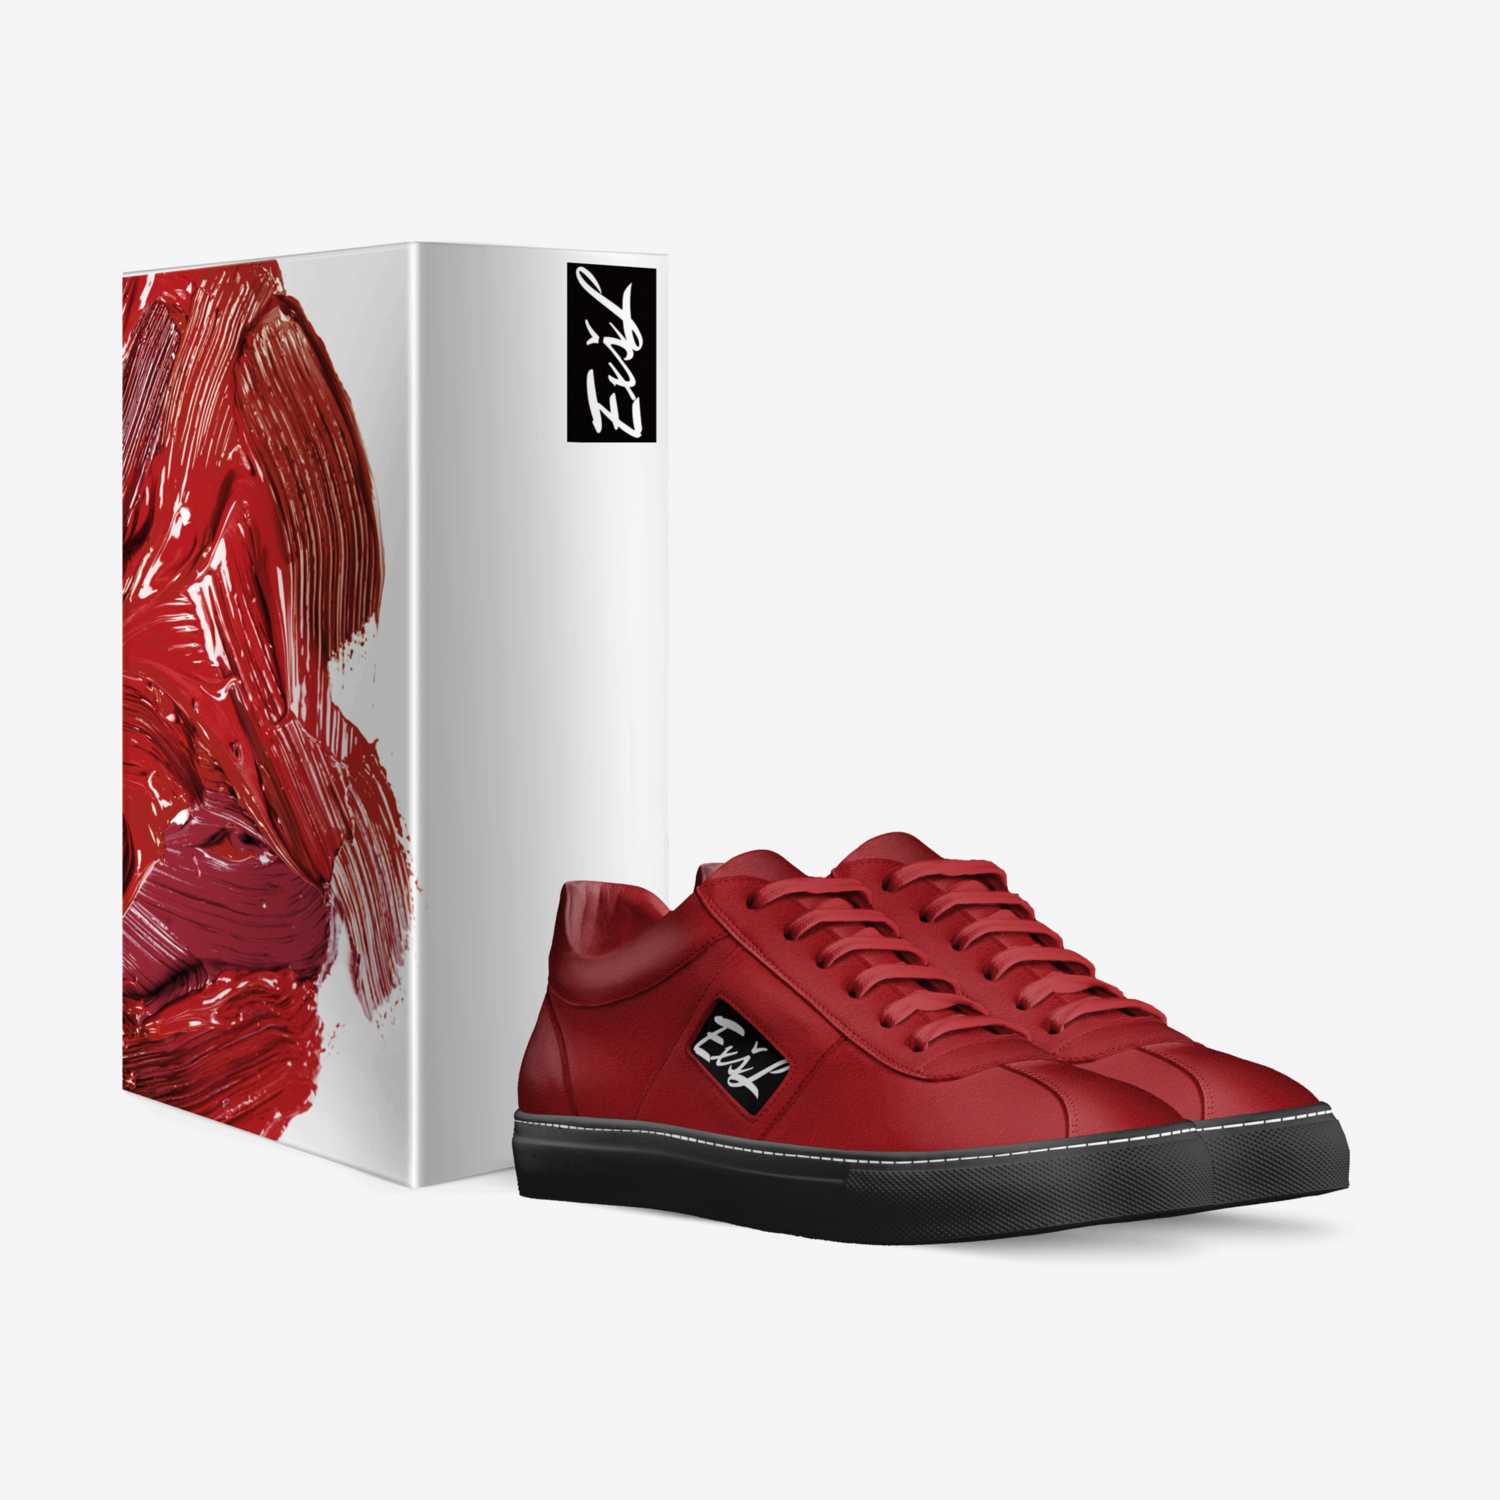 ExšL .Red  custom made in Italy shoes by Exšl Footwear | Box view